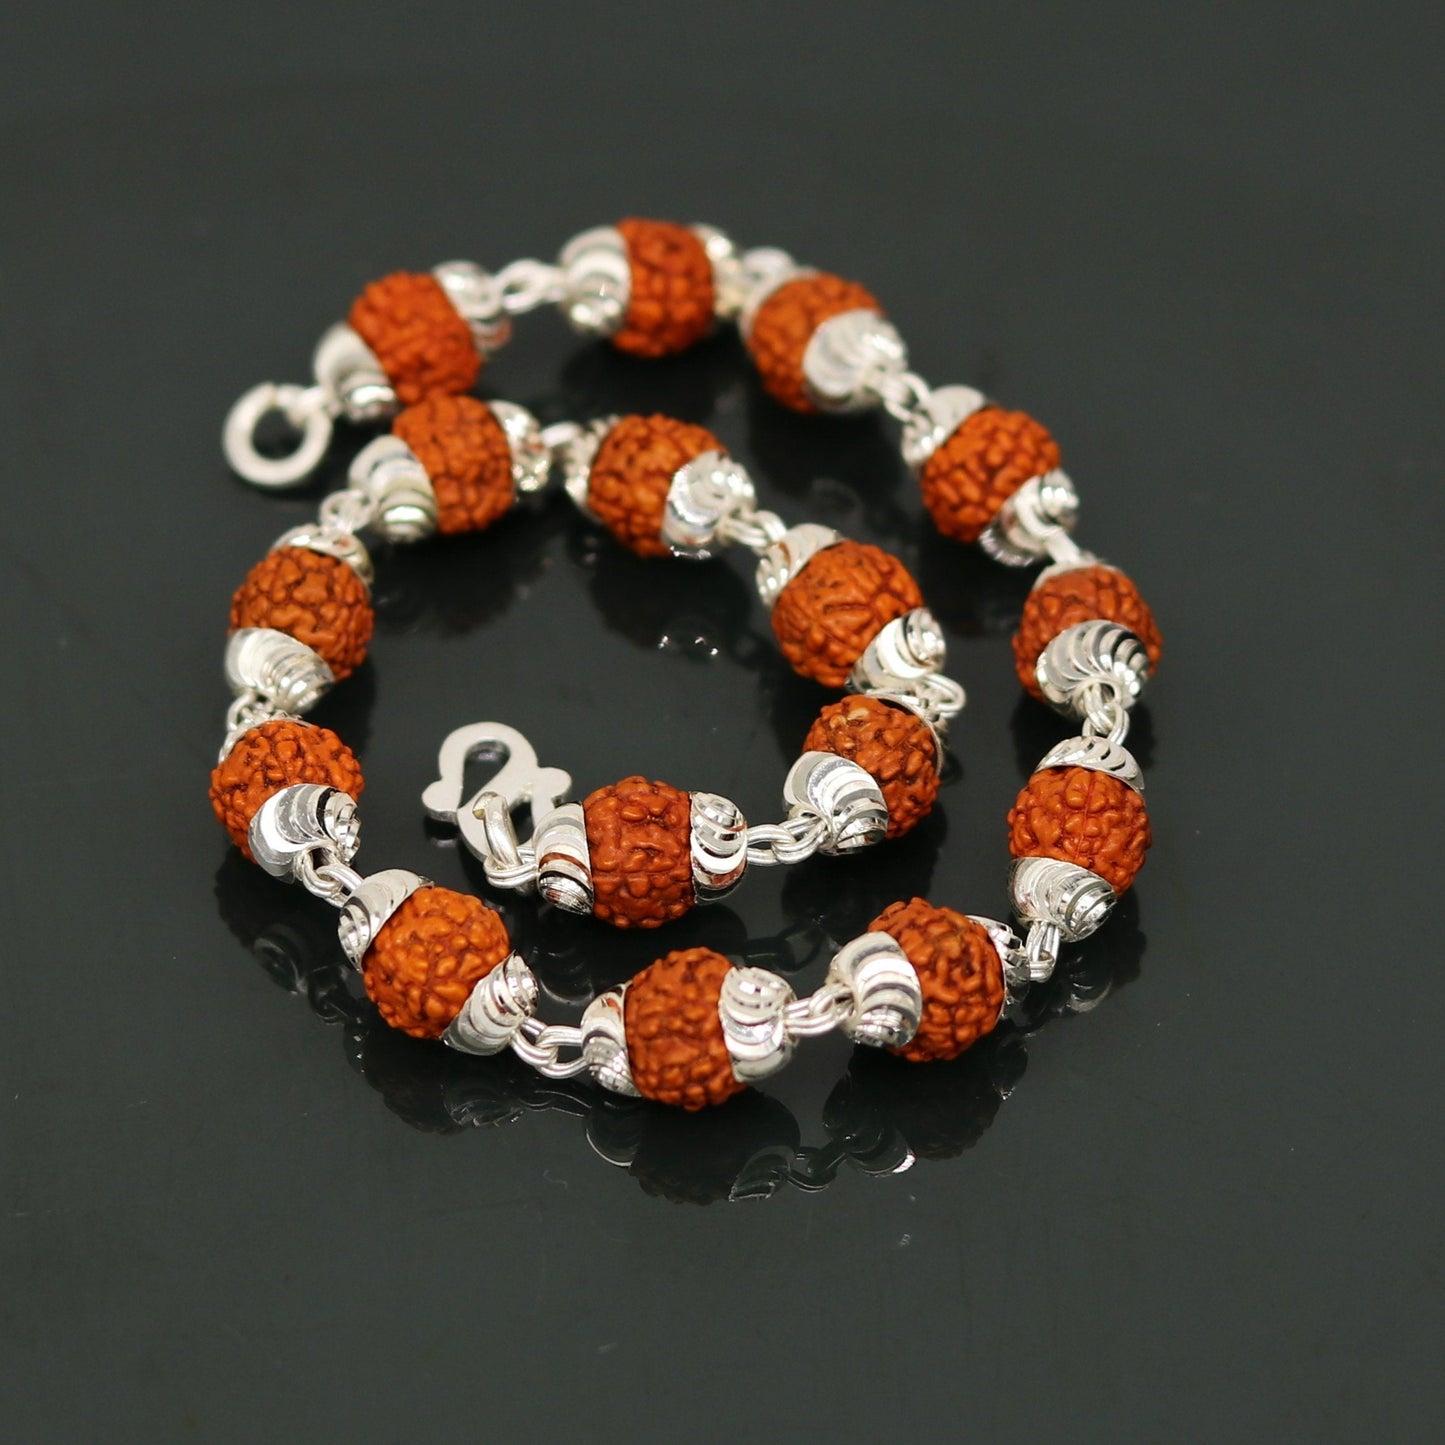 8.2" long handmade gorgeous Rudraksha beads bracelet, excellent customized gifting personalized unisex jewelry from india sbr197 - TRIBAL ORNAMENTS